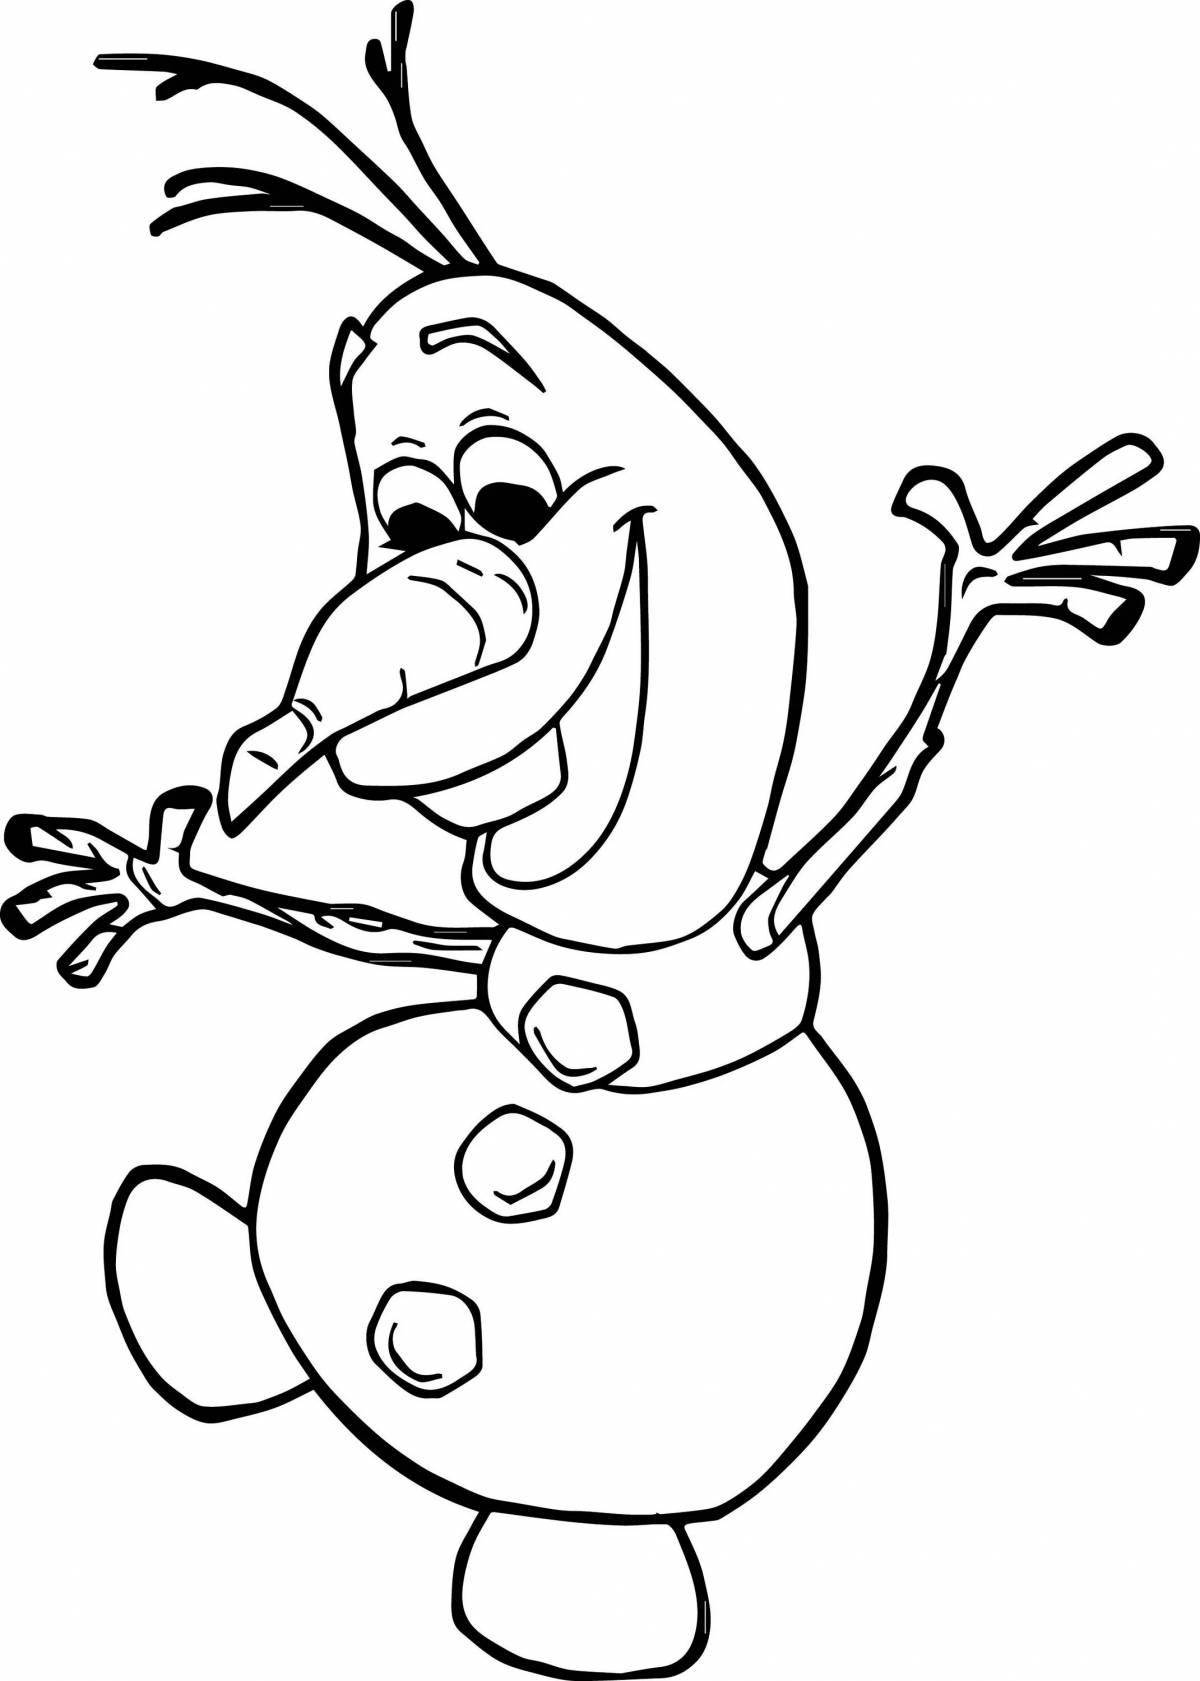 Great olaf coloring book for kids